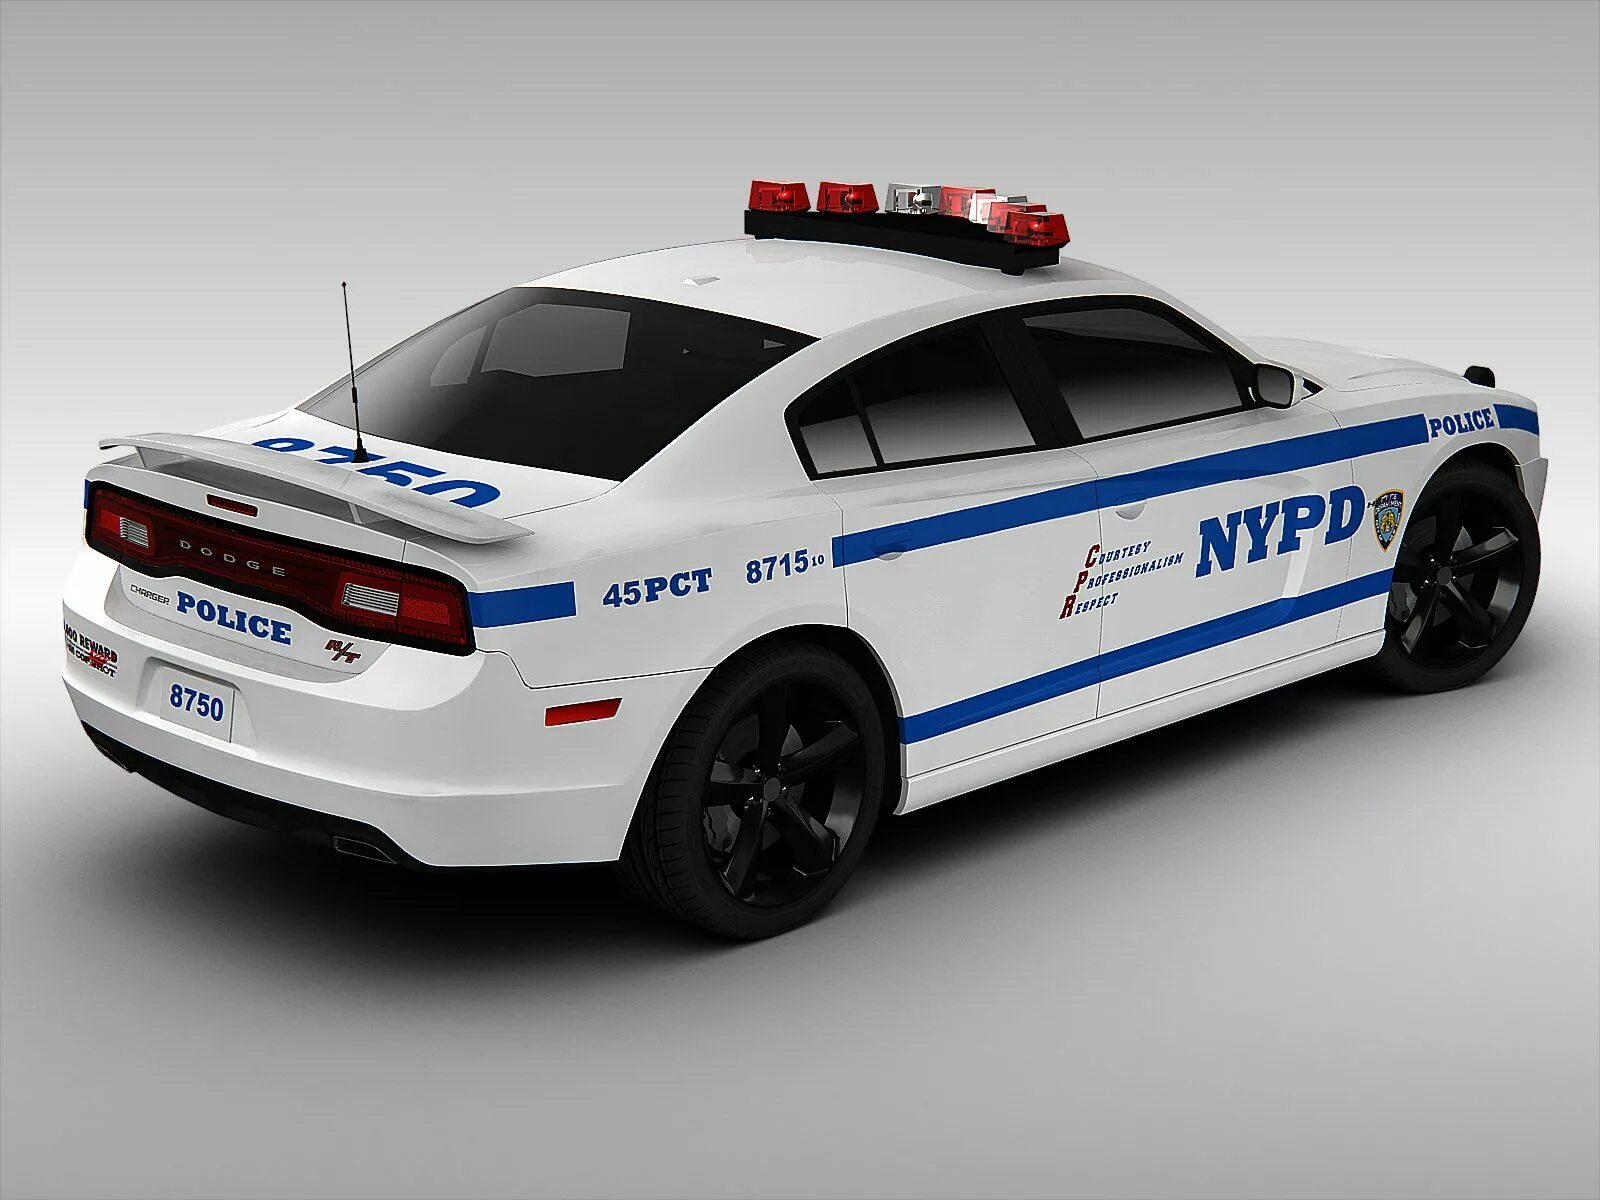 Dodge Charger NYPD Police car 2013. Додж Чарджер полиция NYPD. Dodge Charger полиция. Додж Чарджер 2013 полиция. Машинка про полицию